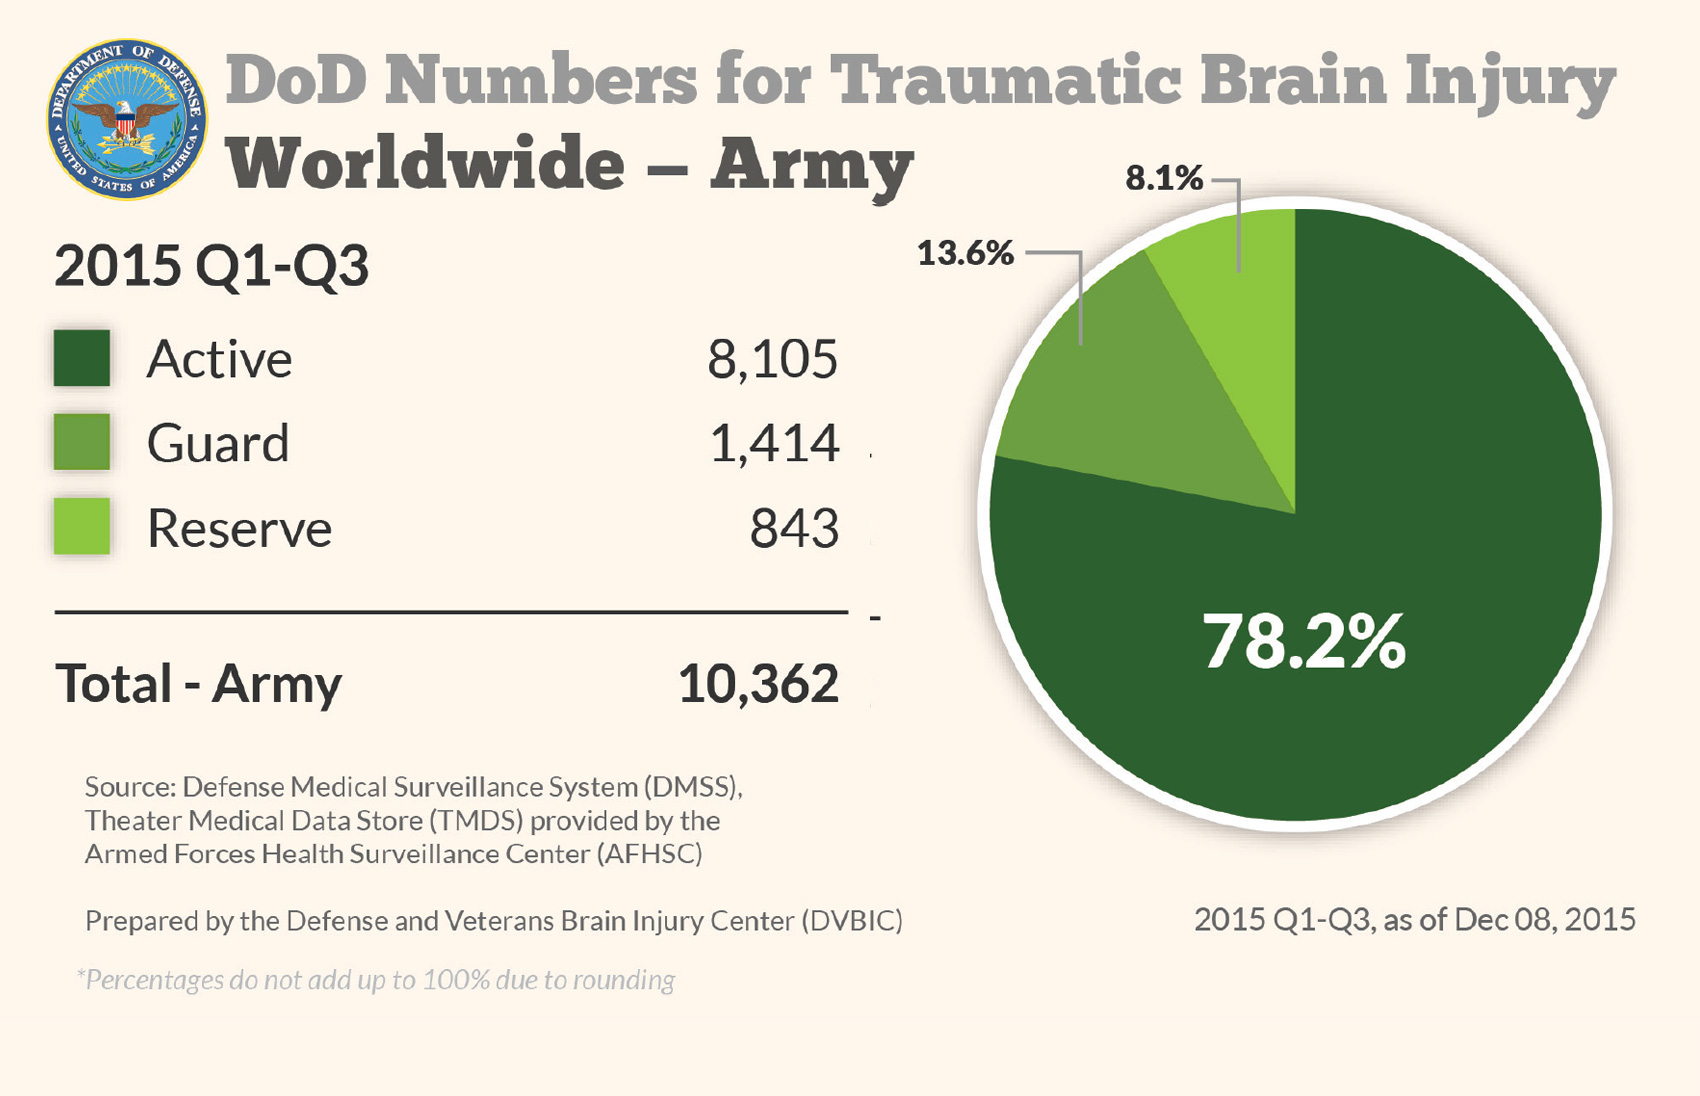 4. The Defense Department is committed to TBI awareness